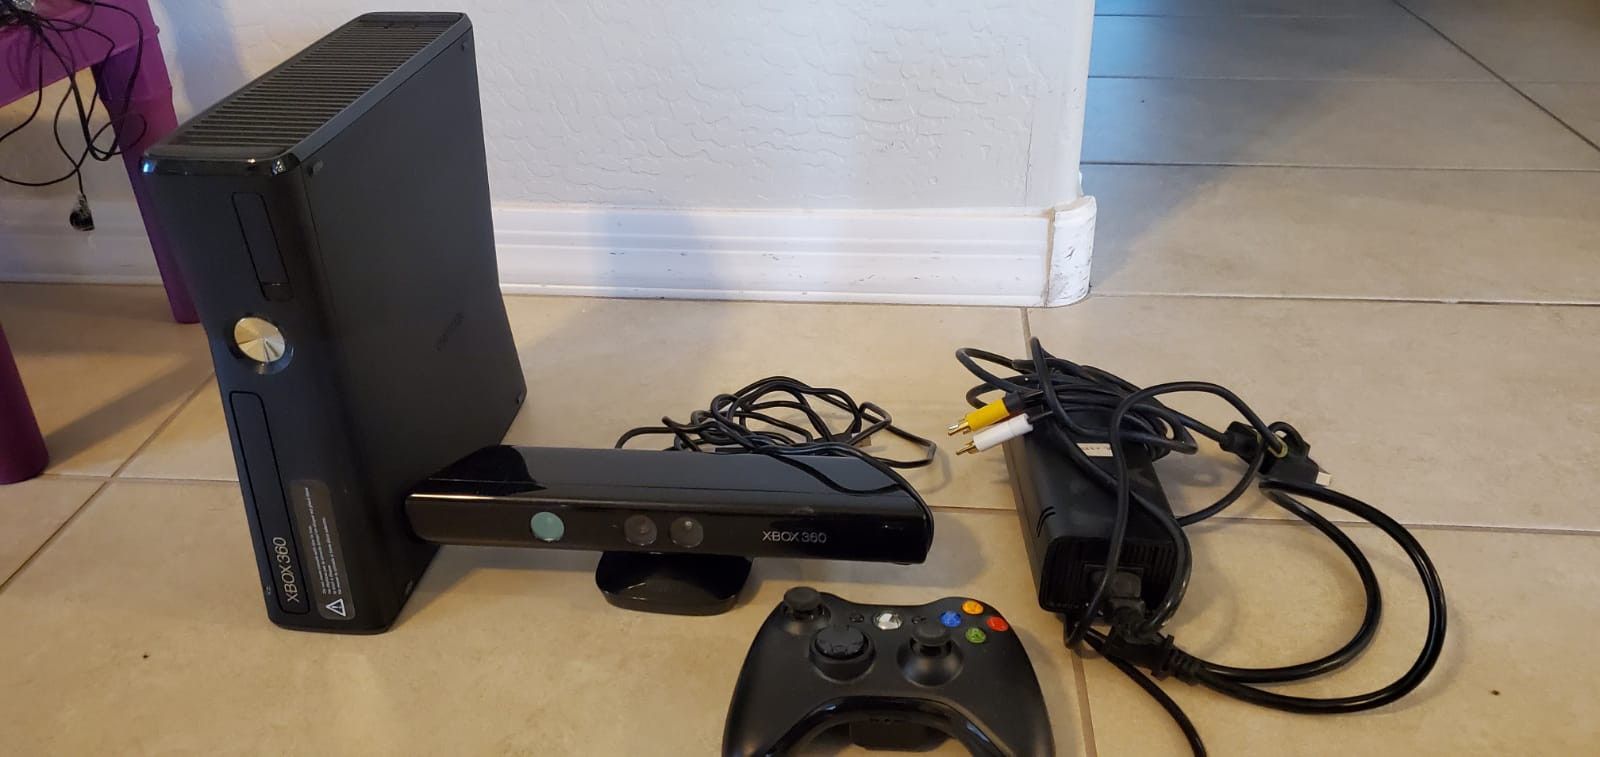 Xbox 360 Kinect with CDs